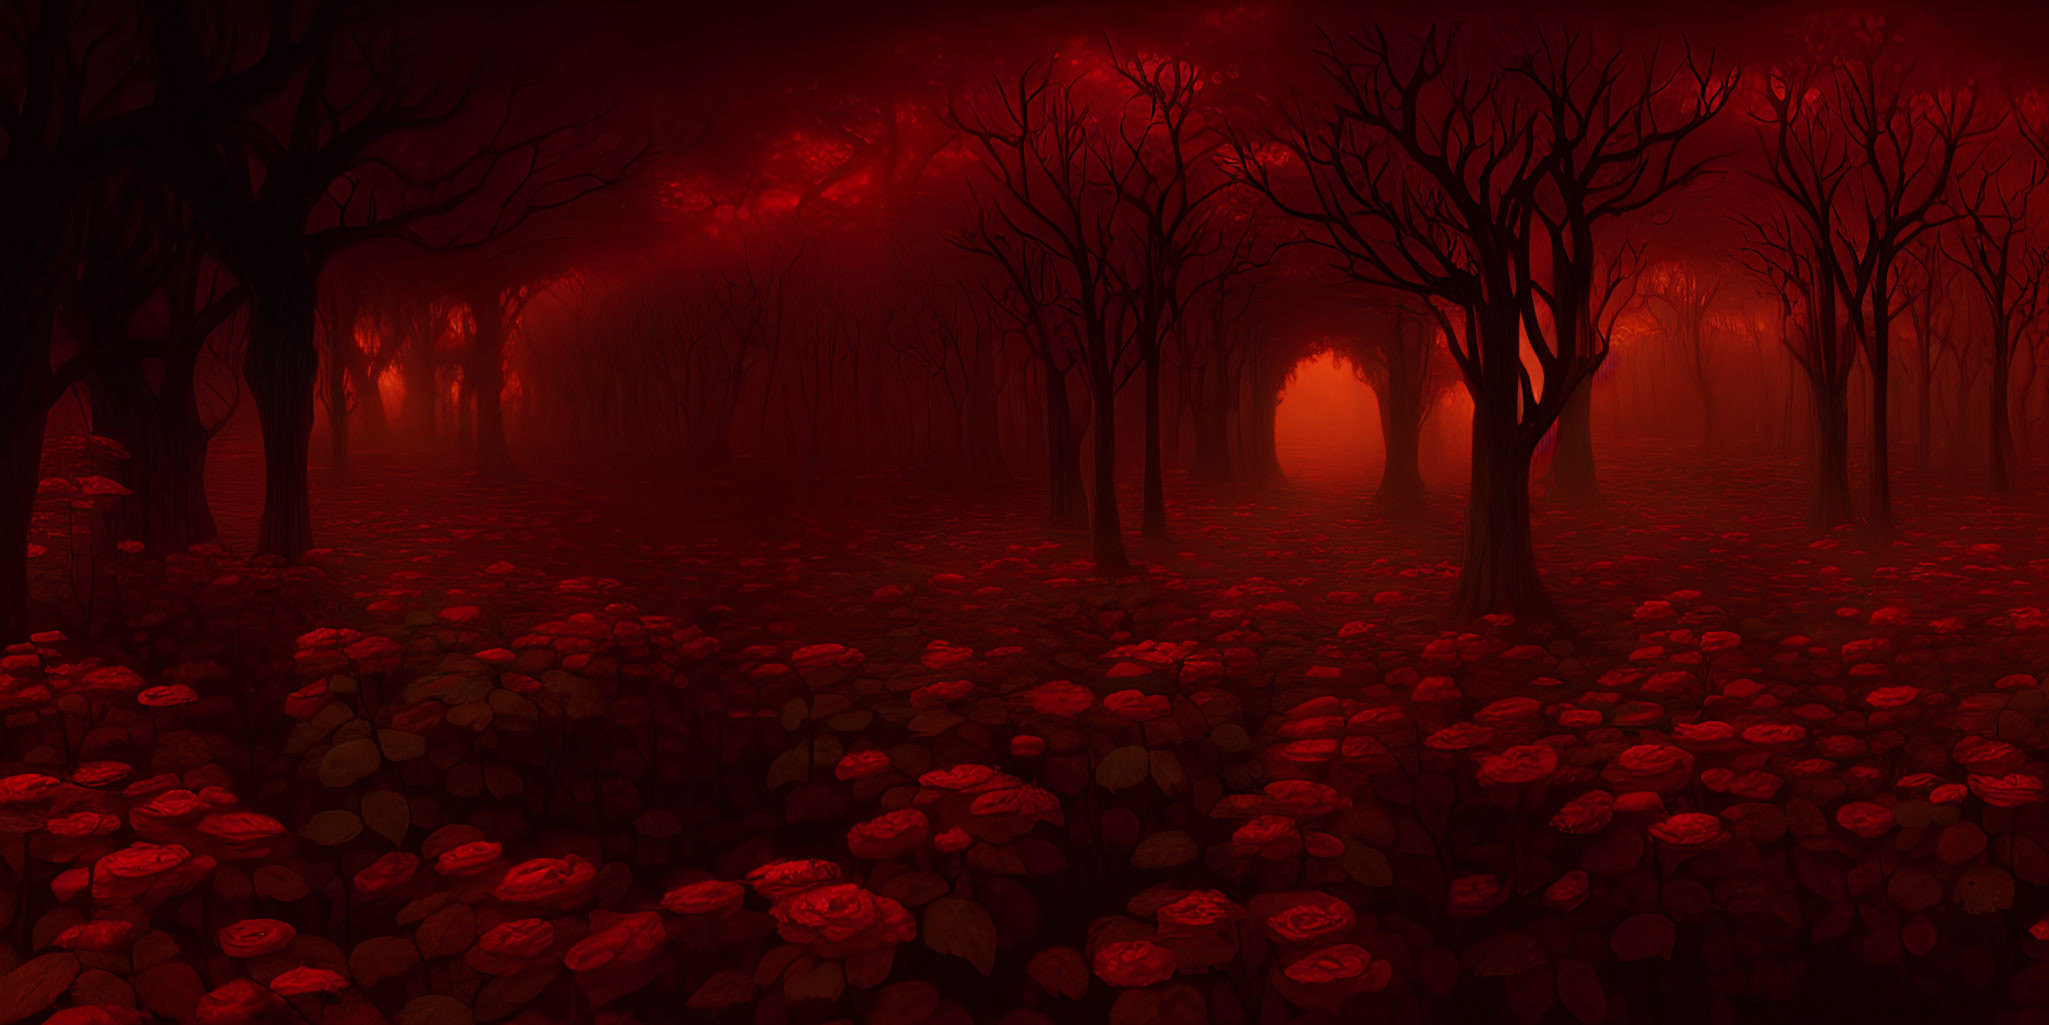 Barren red forest with fog, roses, and crimson sky